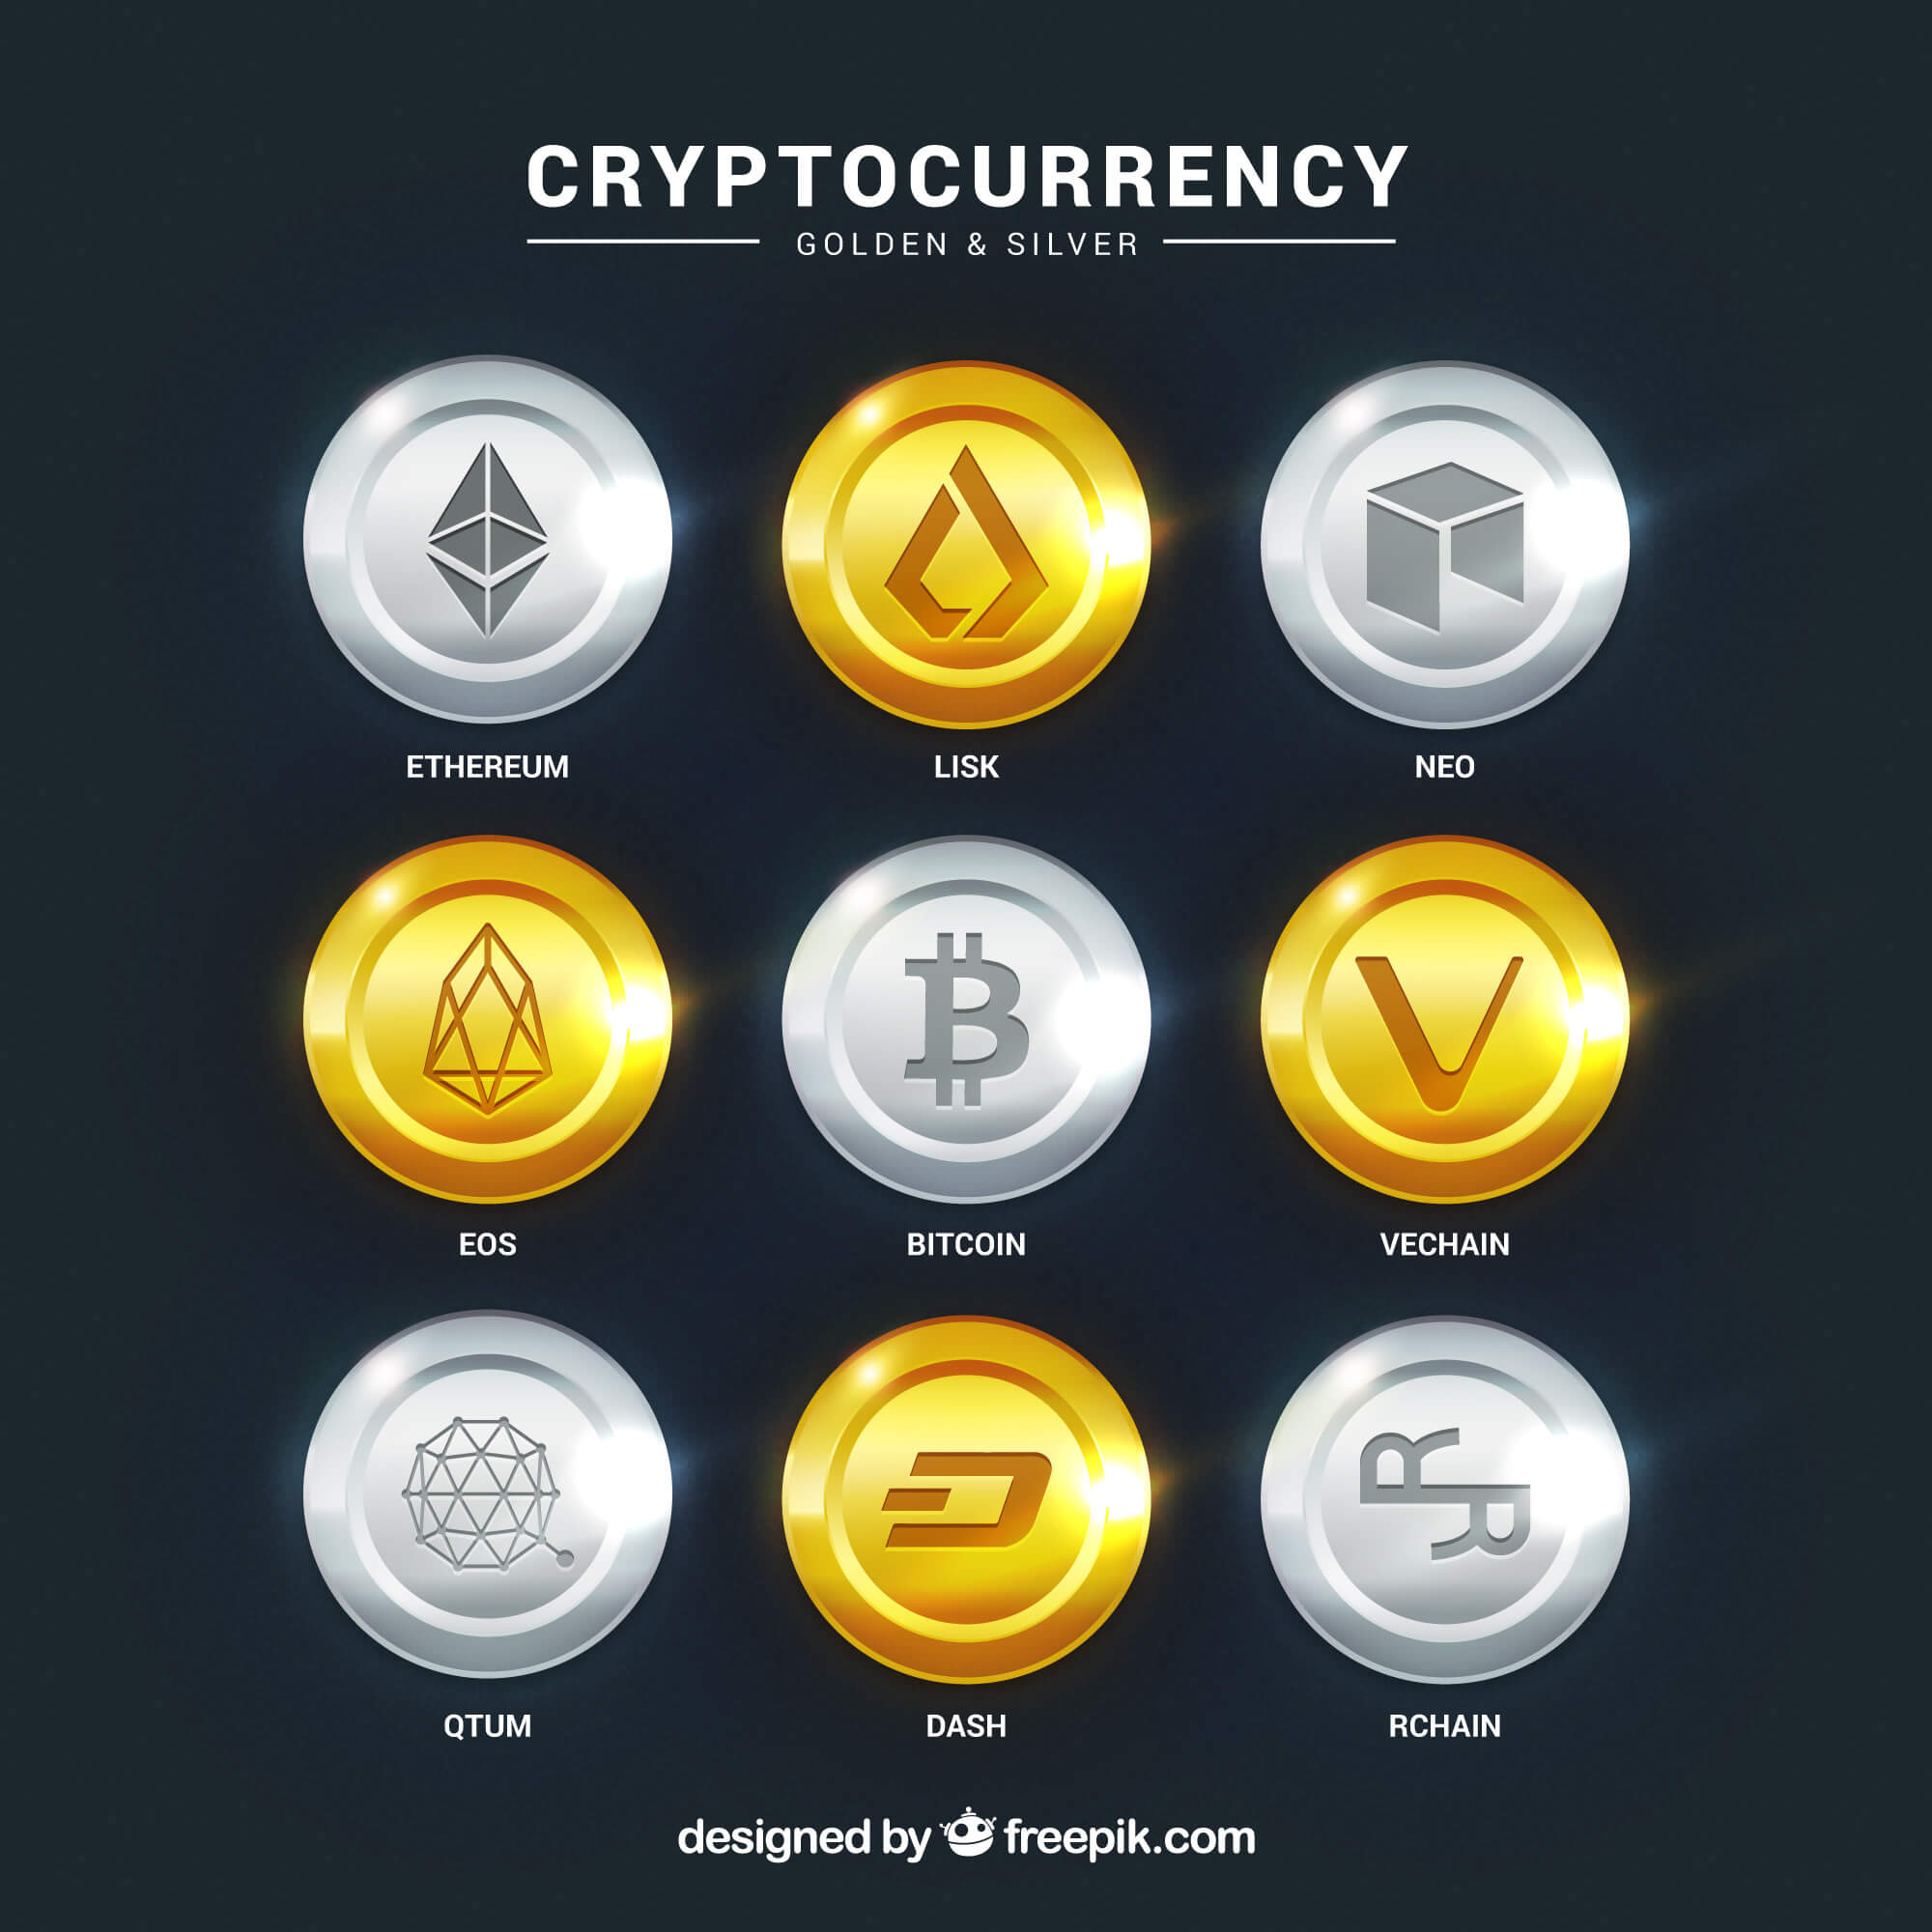 CRypto Currency